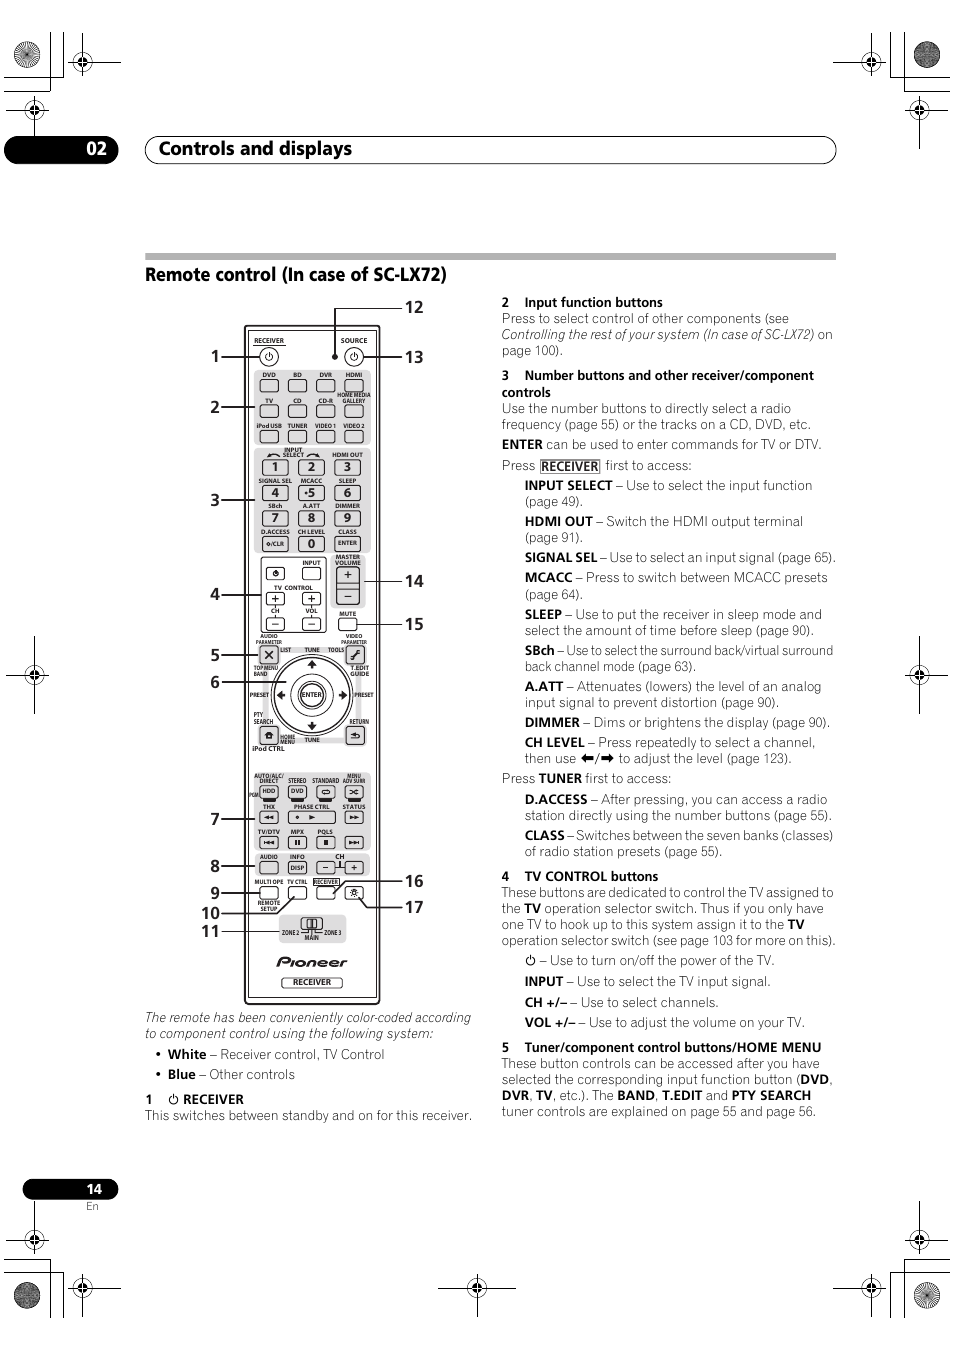 Remote control (in case of sc-lx72), Controls and displays 02 | Pioneer  SC-LX82 User Manual | Page 14 / 148 | Original mode